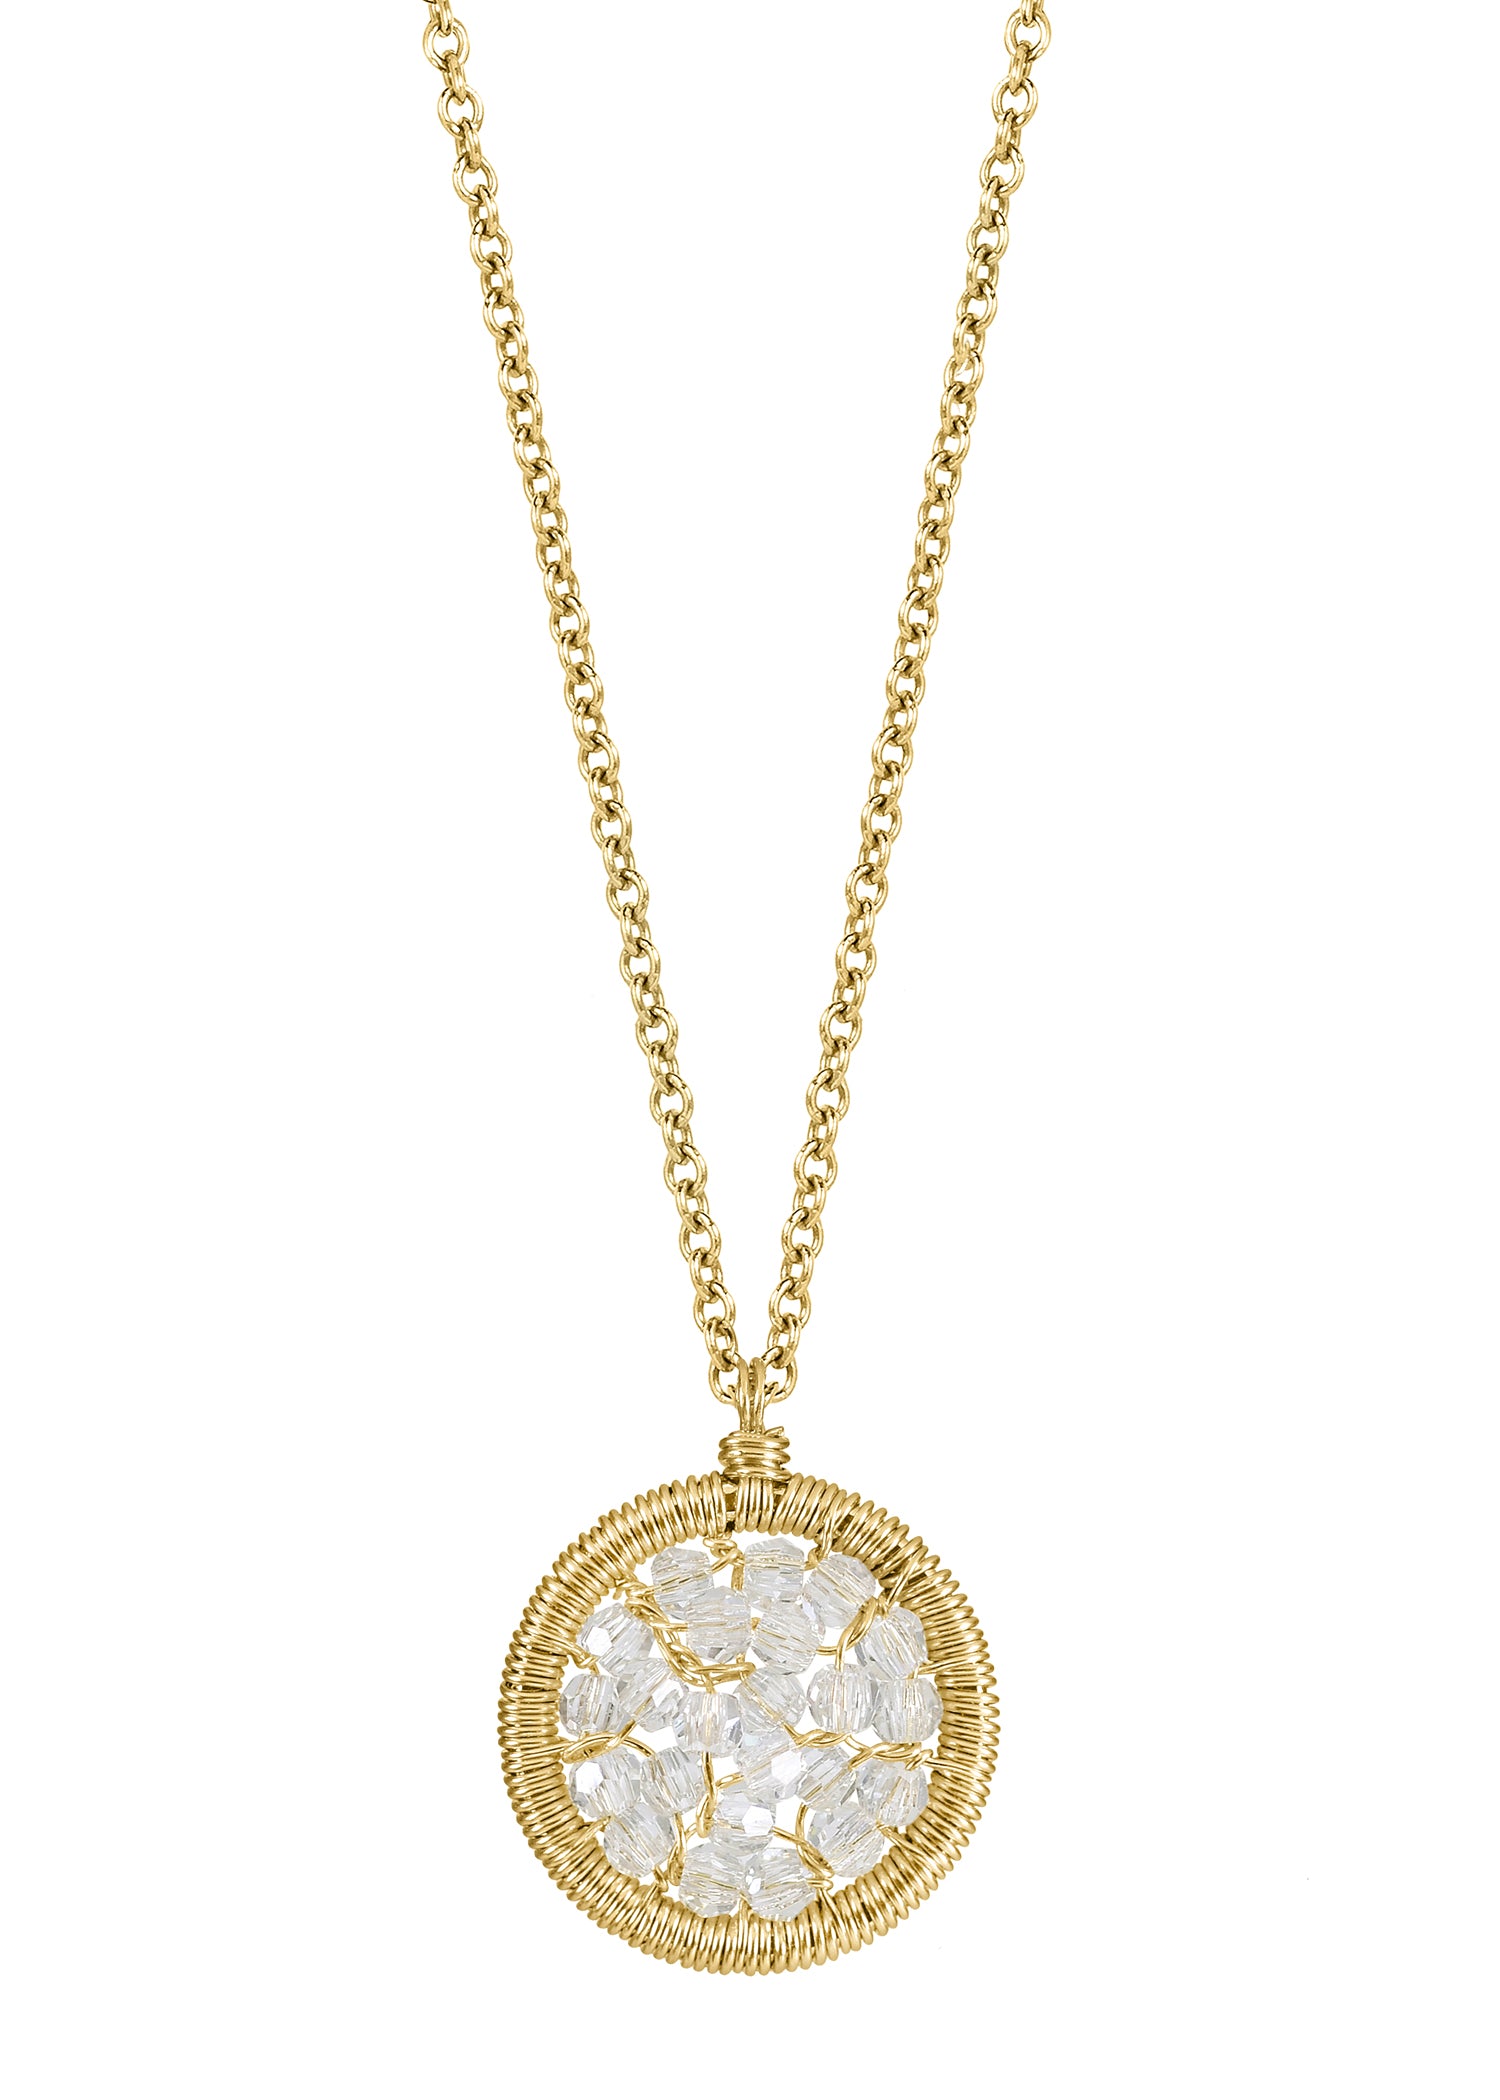 Crystal 14k gold fill Necklace measures 16" in length Pendant measures 1/2" in diameter Handmade in our Los Angeles studio